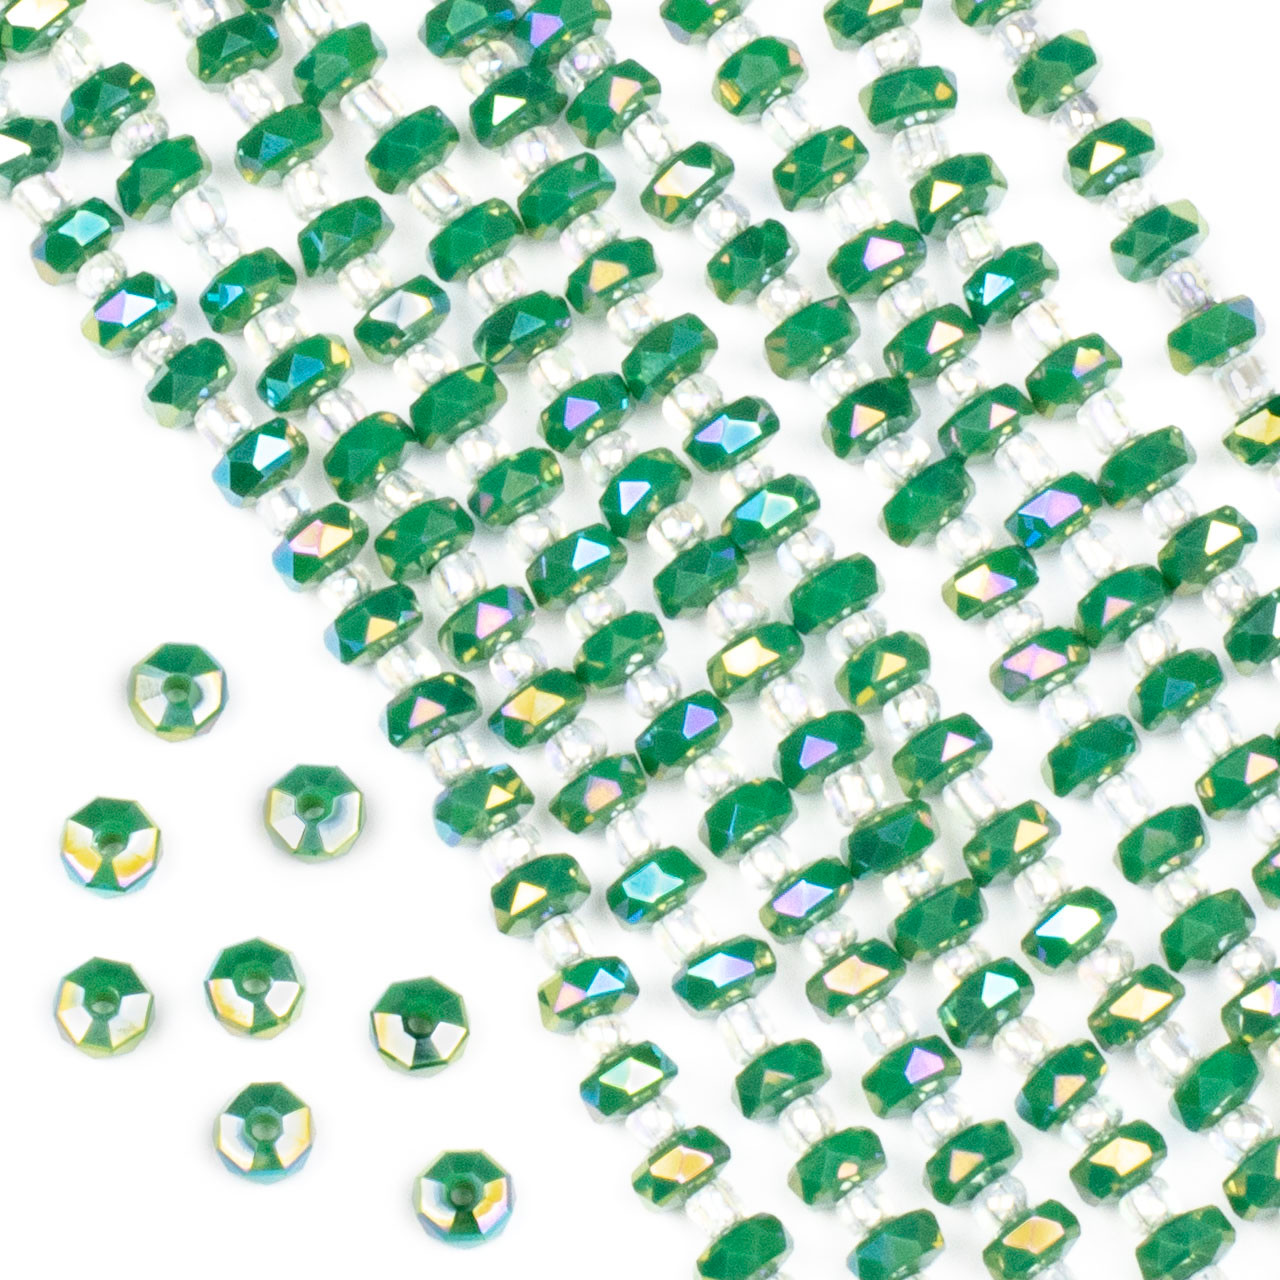 Crystal 4x6mm Opaque Ming Jade Green Rondelle Beads -Approx. 15.5 inch  strand